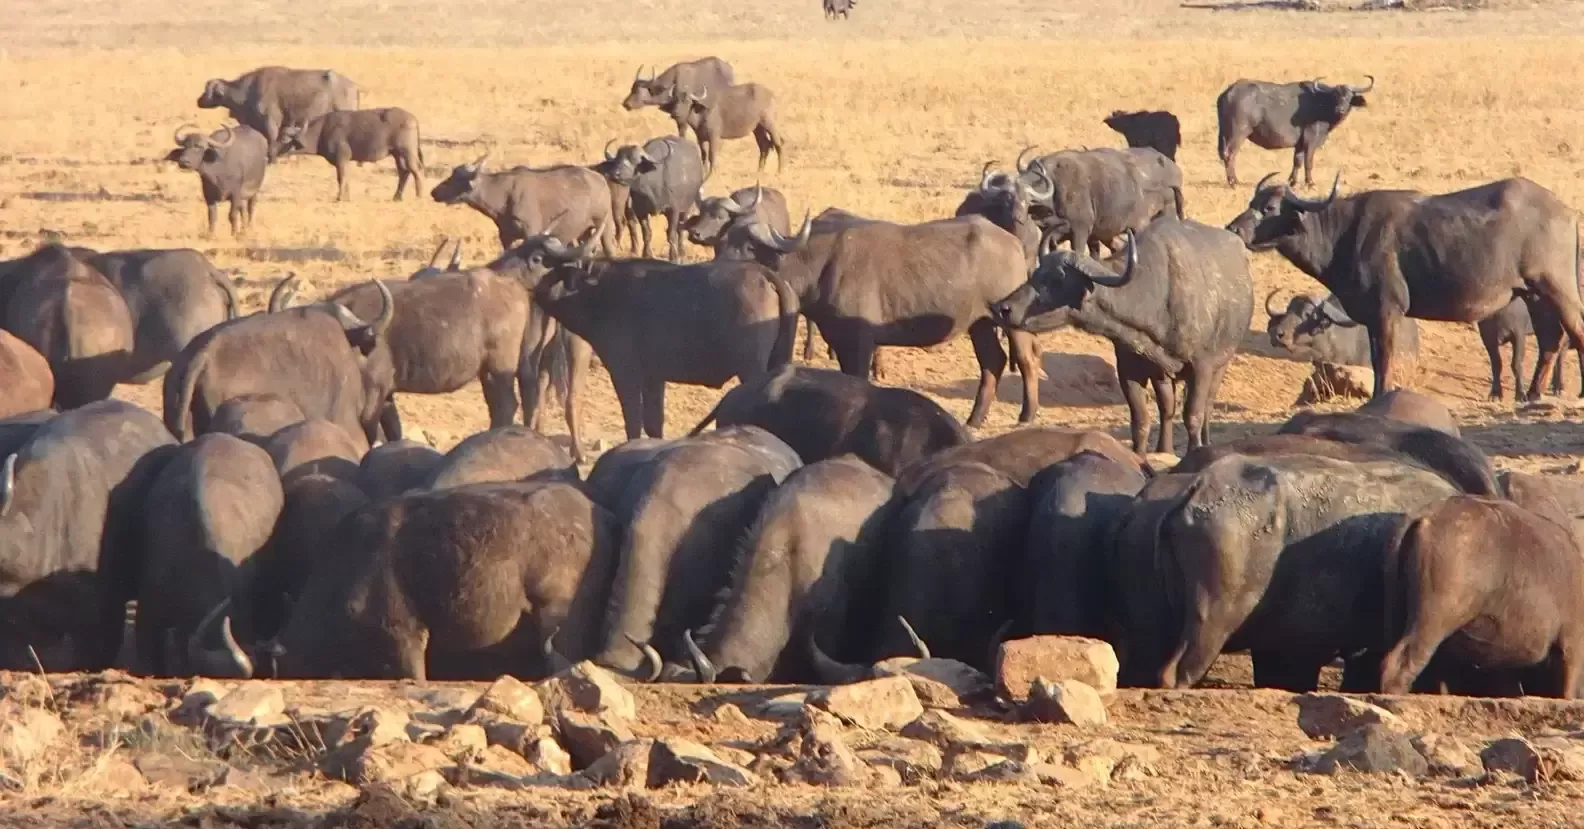 A man travels for hours daily through a drought to provide water for wild animals 9